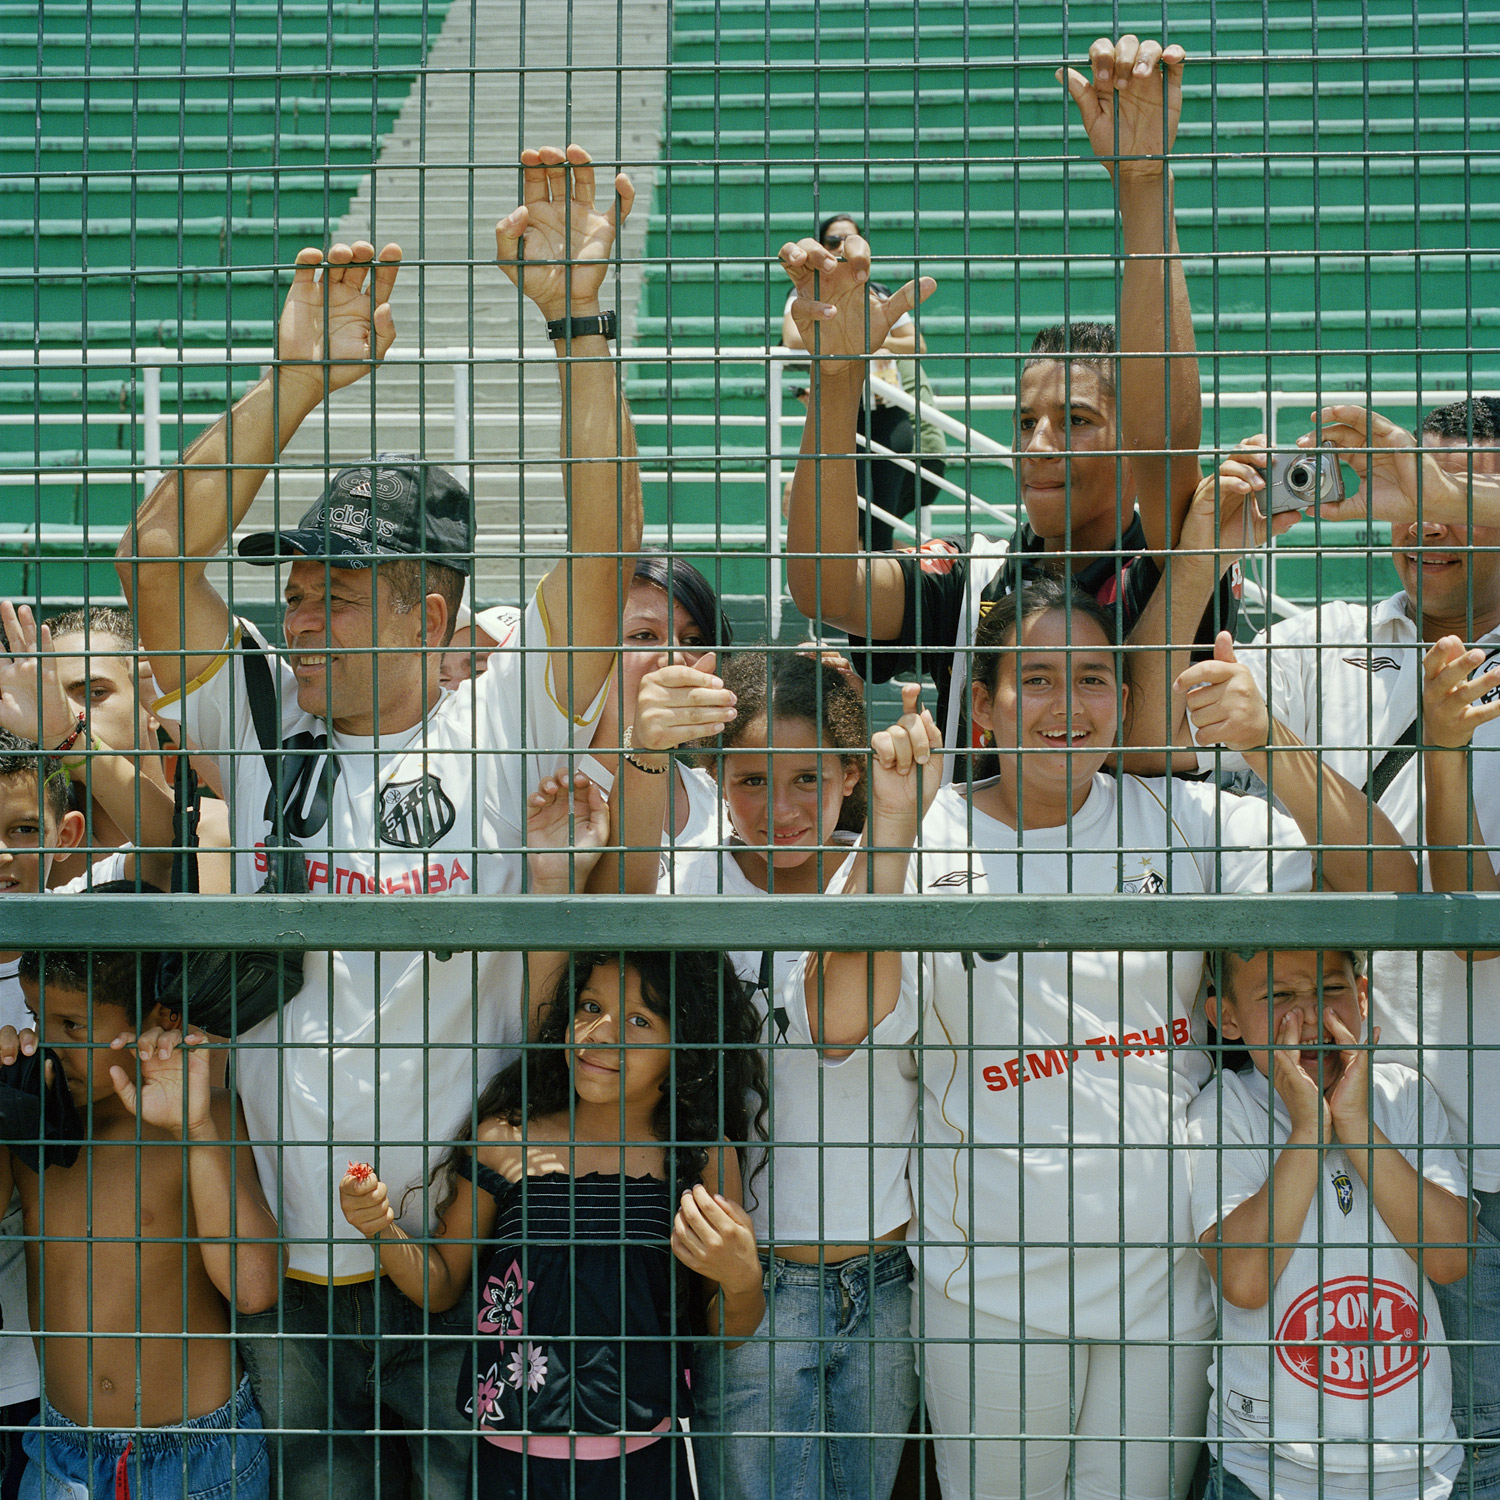 Santos fans, familiarly known as Santistas, watch through the fence as the women’s team celebrates their Campeonato Paulista de Futebol Feminino championship in São Paulo, Brazil. Once considered a disgrace to the much celebrated men's game, futebol feminino in Brazil has finally started to be accepted among male and female fans. (November 27, 2010)